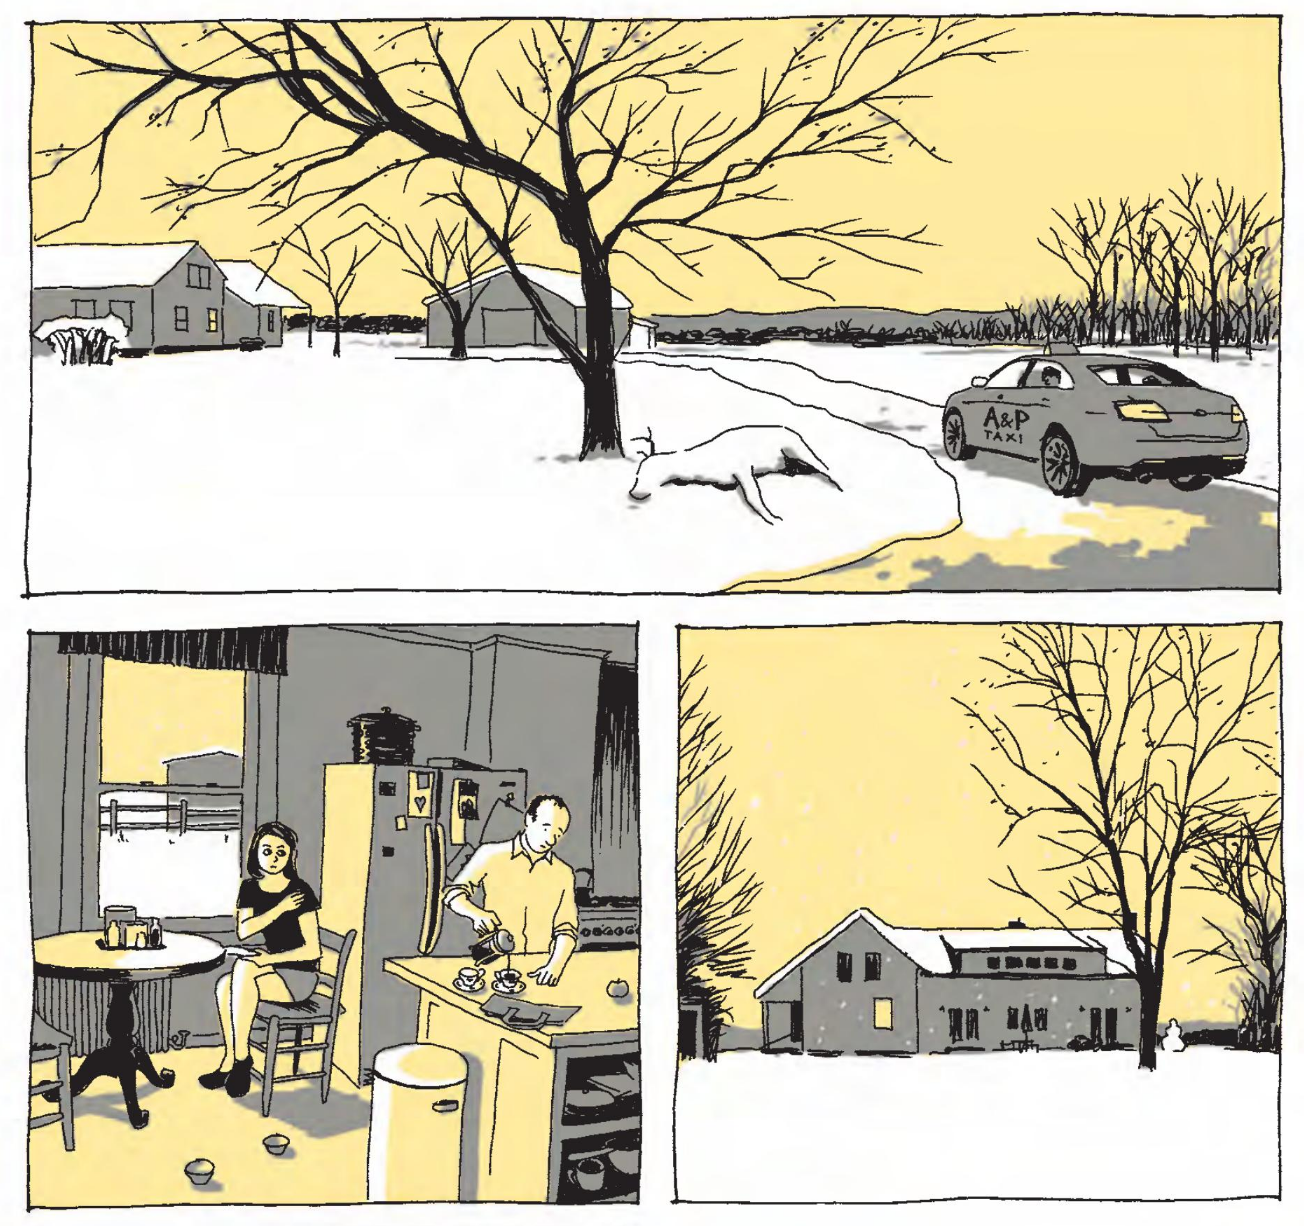 A series of panels showing a cab pulling up to a lonely, snow-covered house. A man and woman silently prepare coffee inside.